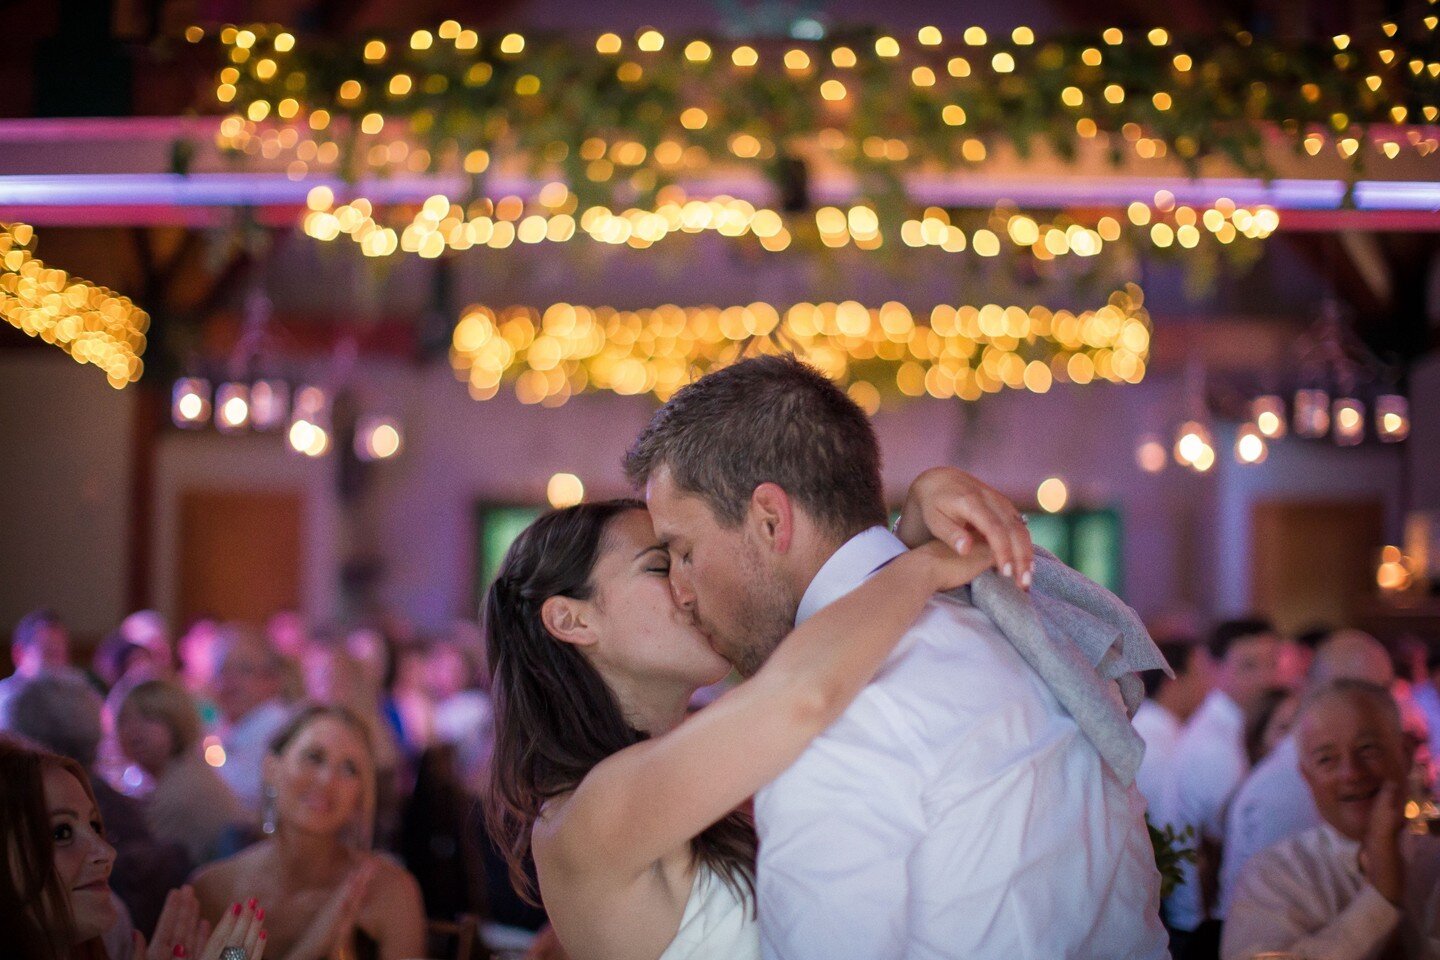 Go ahead and make a scene. We'll take advantage of that lovely bokeh. And the composition. Aall you have to do is gave fun. #weddingkiss #kiss #reception #bokeh #weddinglighting #weddingreception #kissing #destinationweddings #destinationwedding #tra